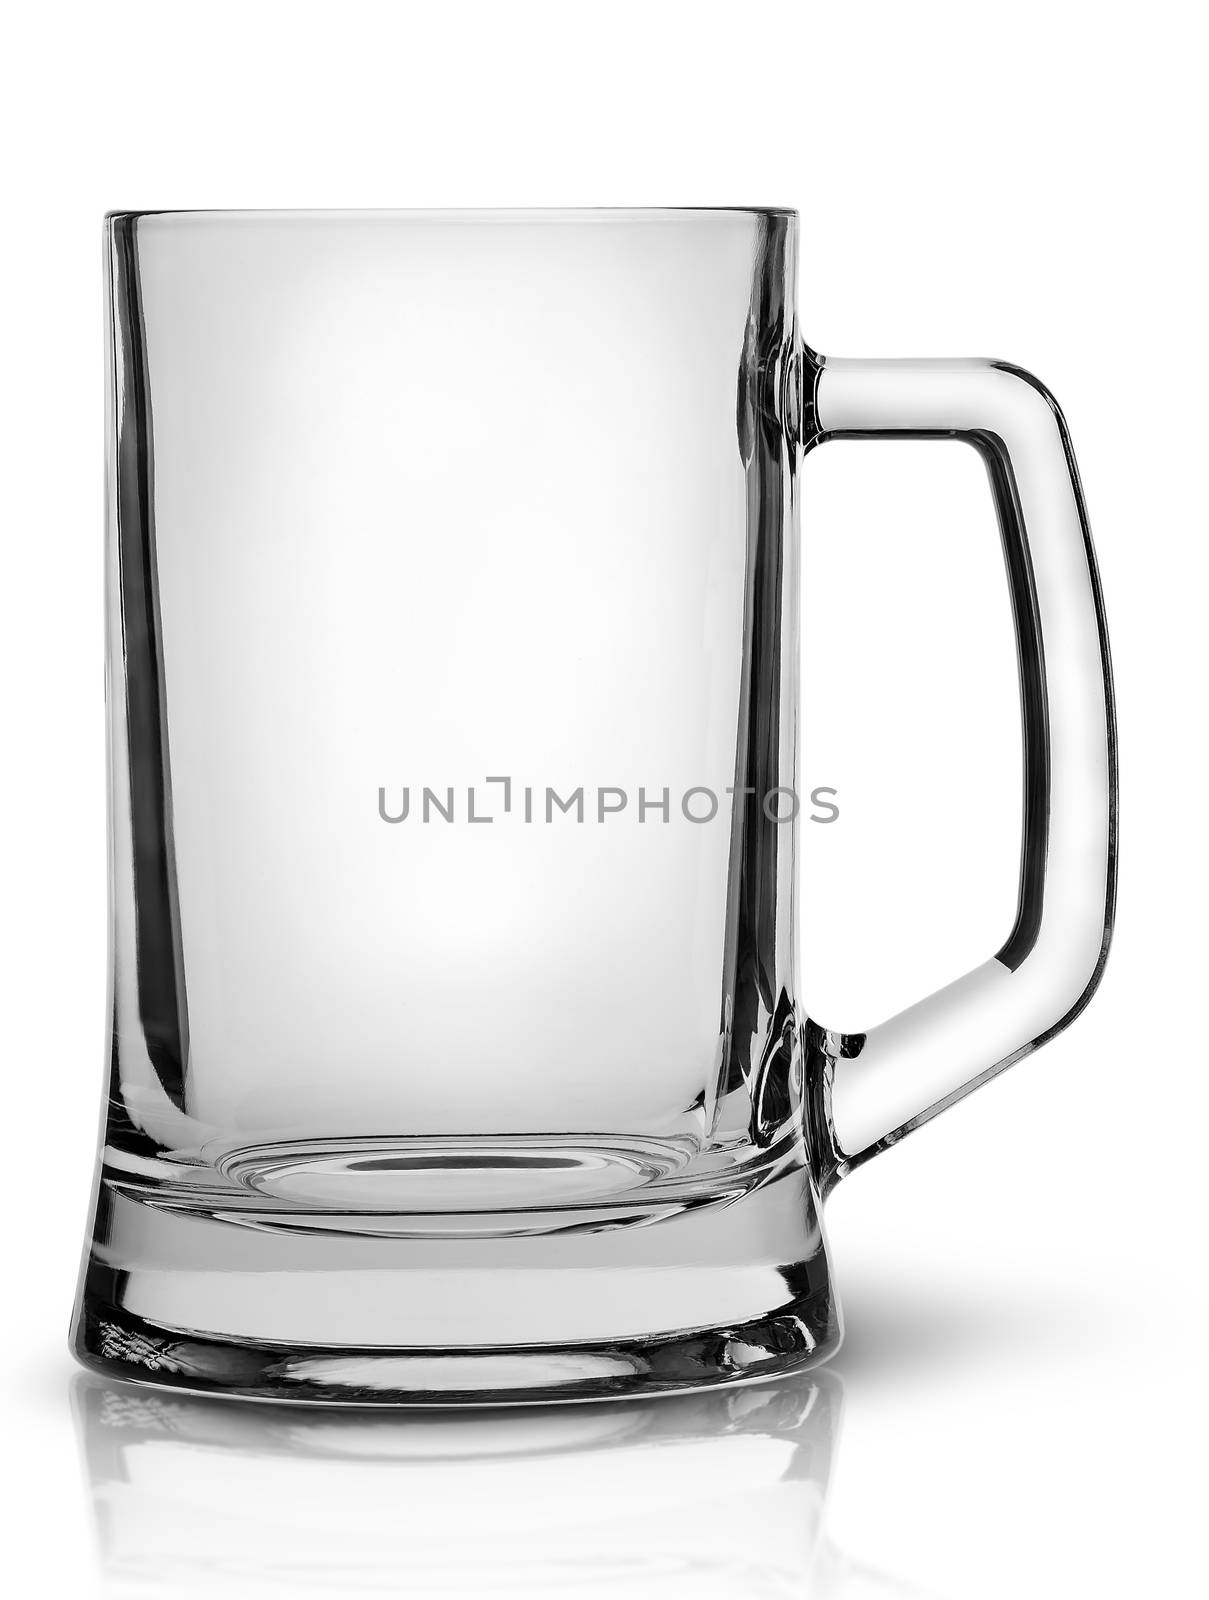 In front empty beer mug isolated on white background